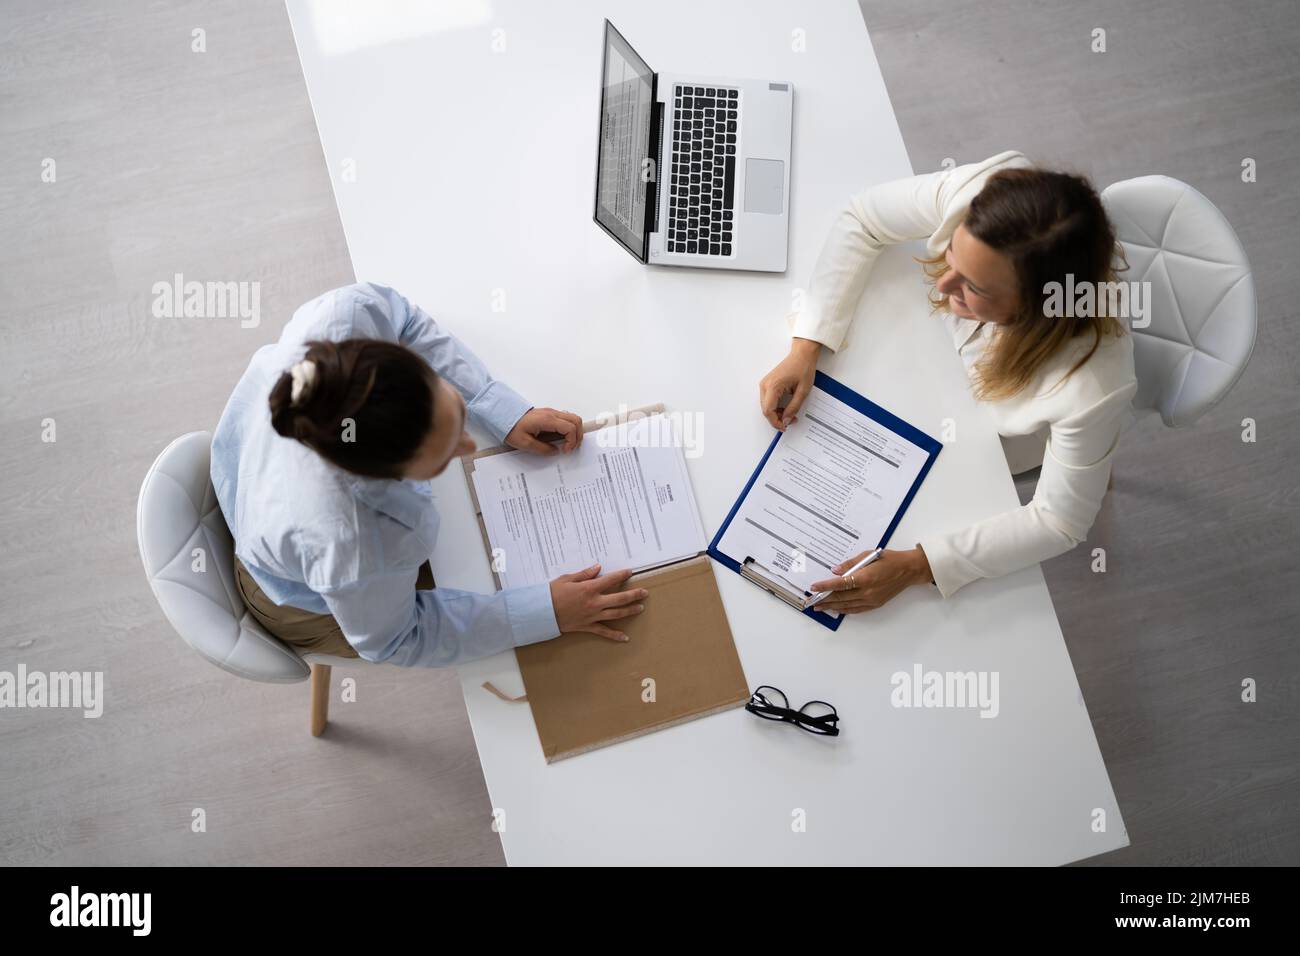 Happy Businesswoman And Businesswoman Discussing In Office Stock Photo